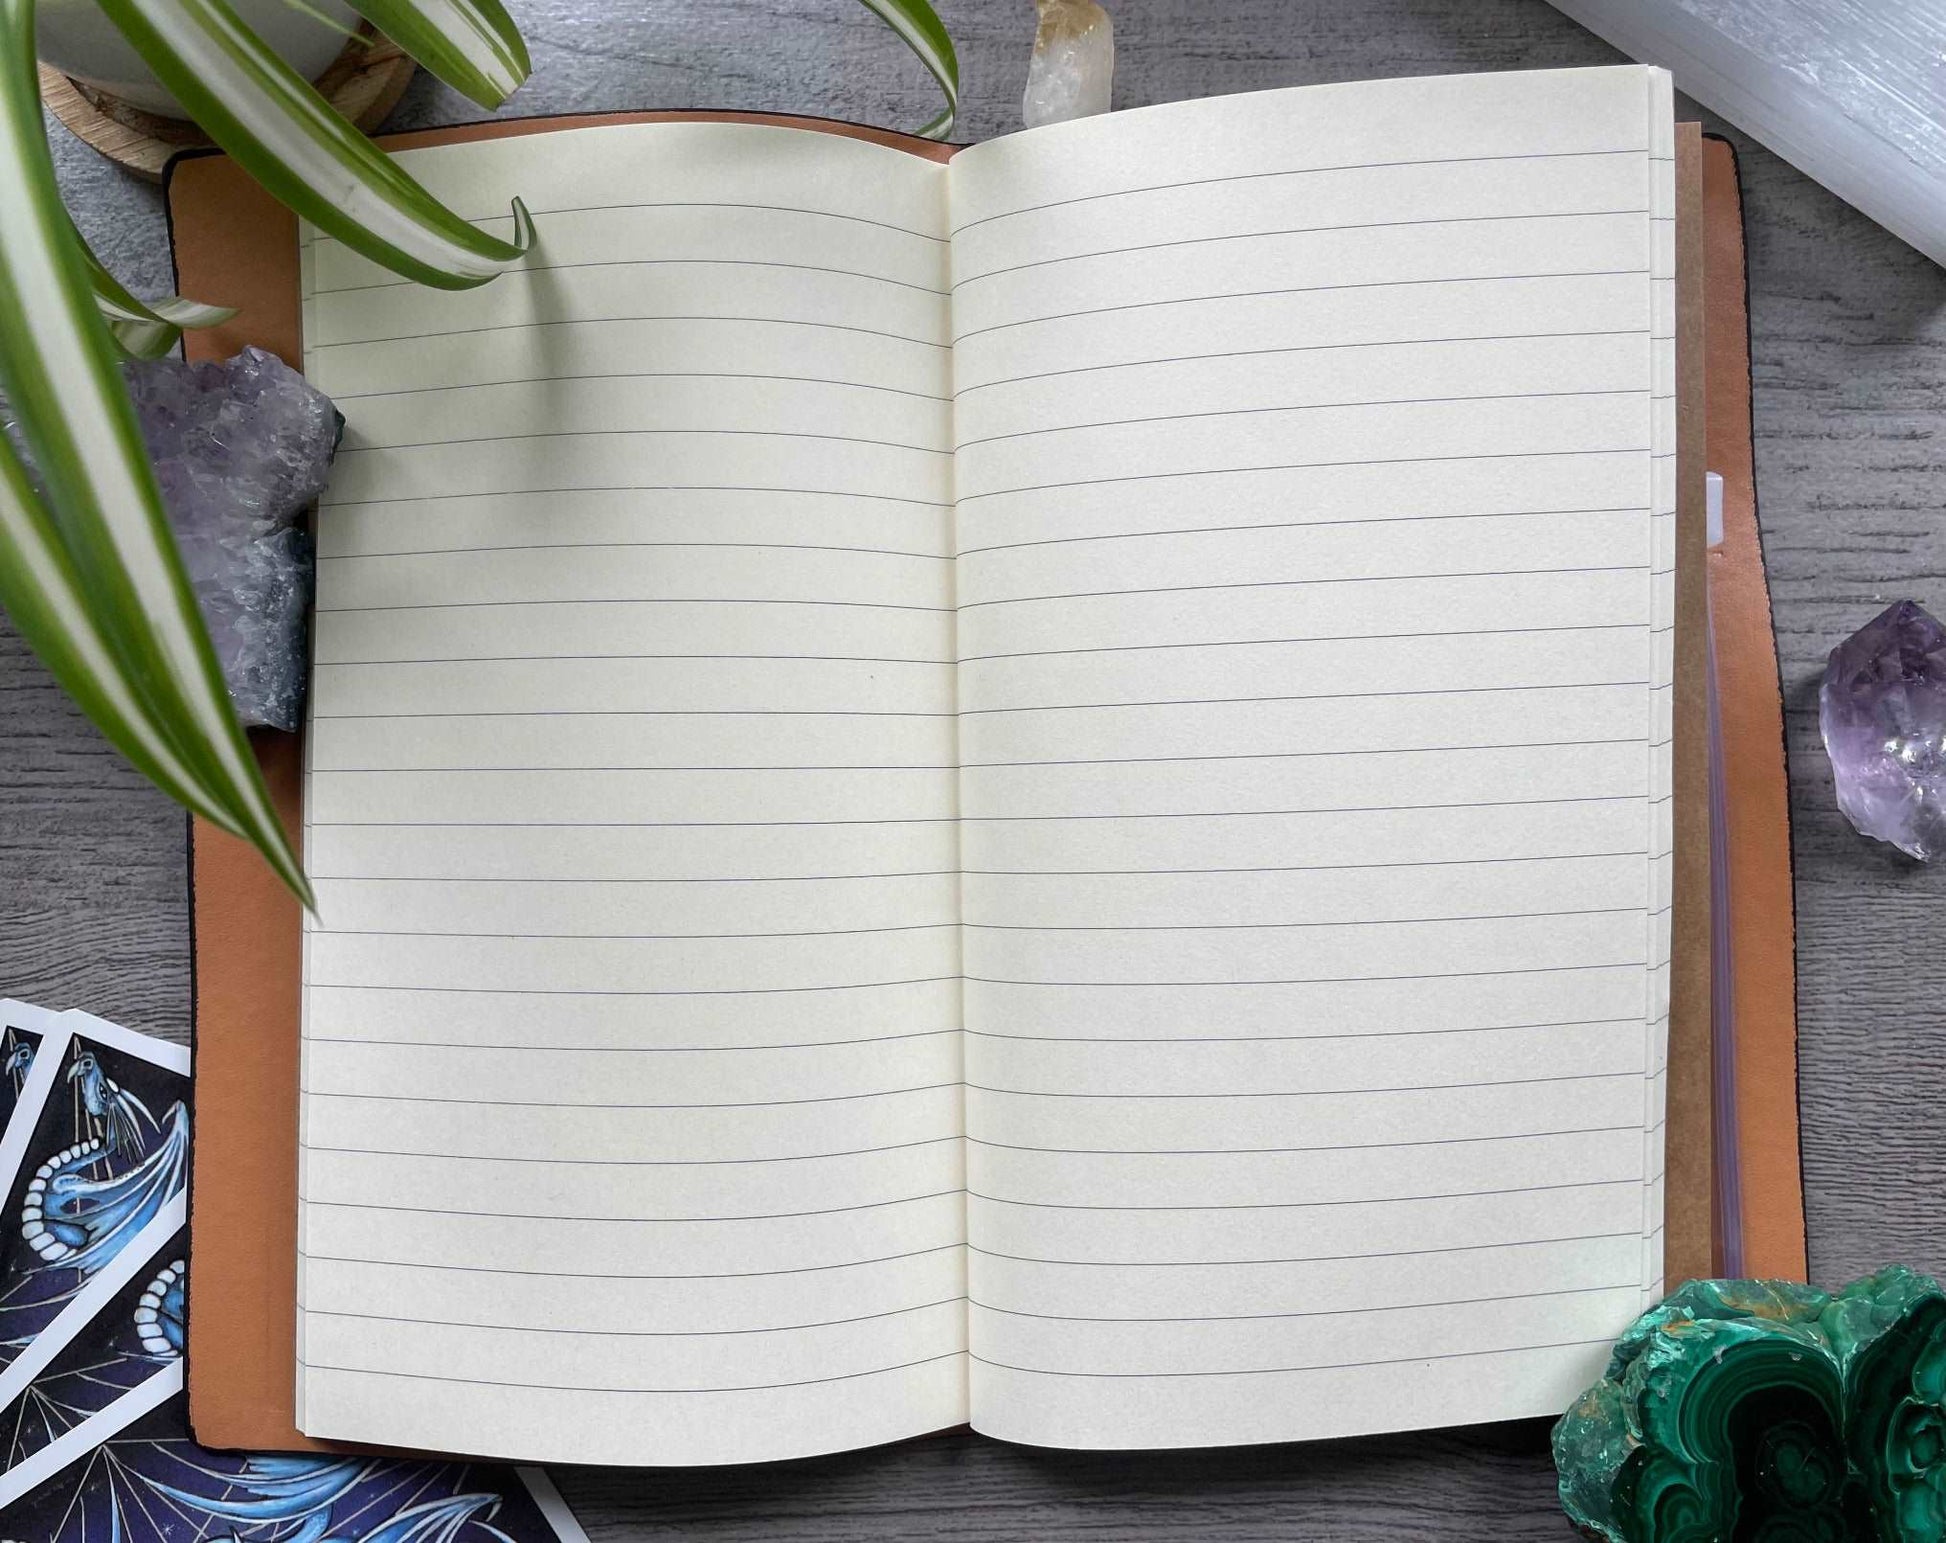 Pictured is a faux leather refillable notebook with a crystal.